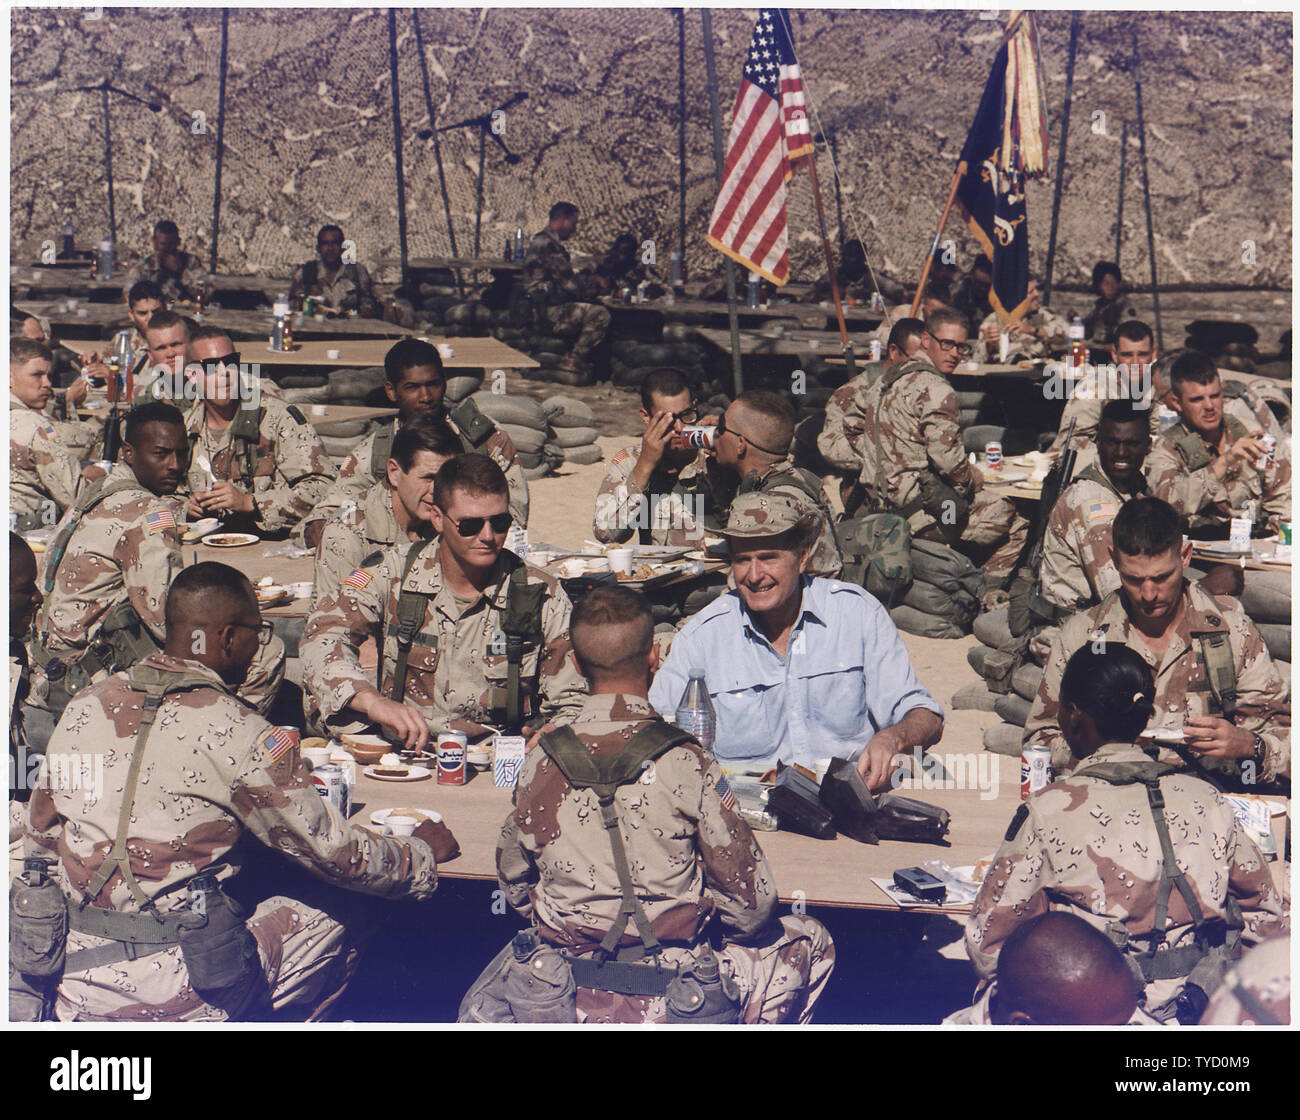 Photograph of President George H. W. Bush Enjoying Thanksgiving Dinner with Troops; Scope and content:  This photograph documents President George H. W. and Barbara Bush visiting the U.S. Army 197th Infantry Brigade stationed in Saudi Arabia on November 22, 1990 during Operation Desert Shield.  President and Mrs. Bush had Thanksgiving dinner with the troops.  President Bush later shared a stage with Representative Bob Michel, Senator Robert Dole, Senator George Mitchell, and Representative Tom Foley and spoke to the soldiers. Stock Photo